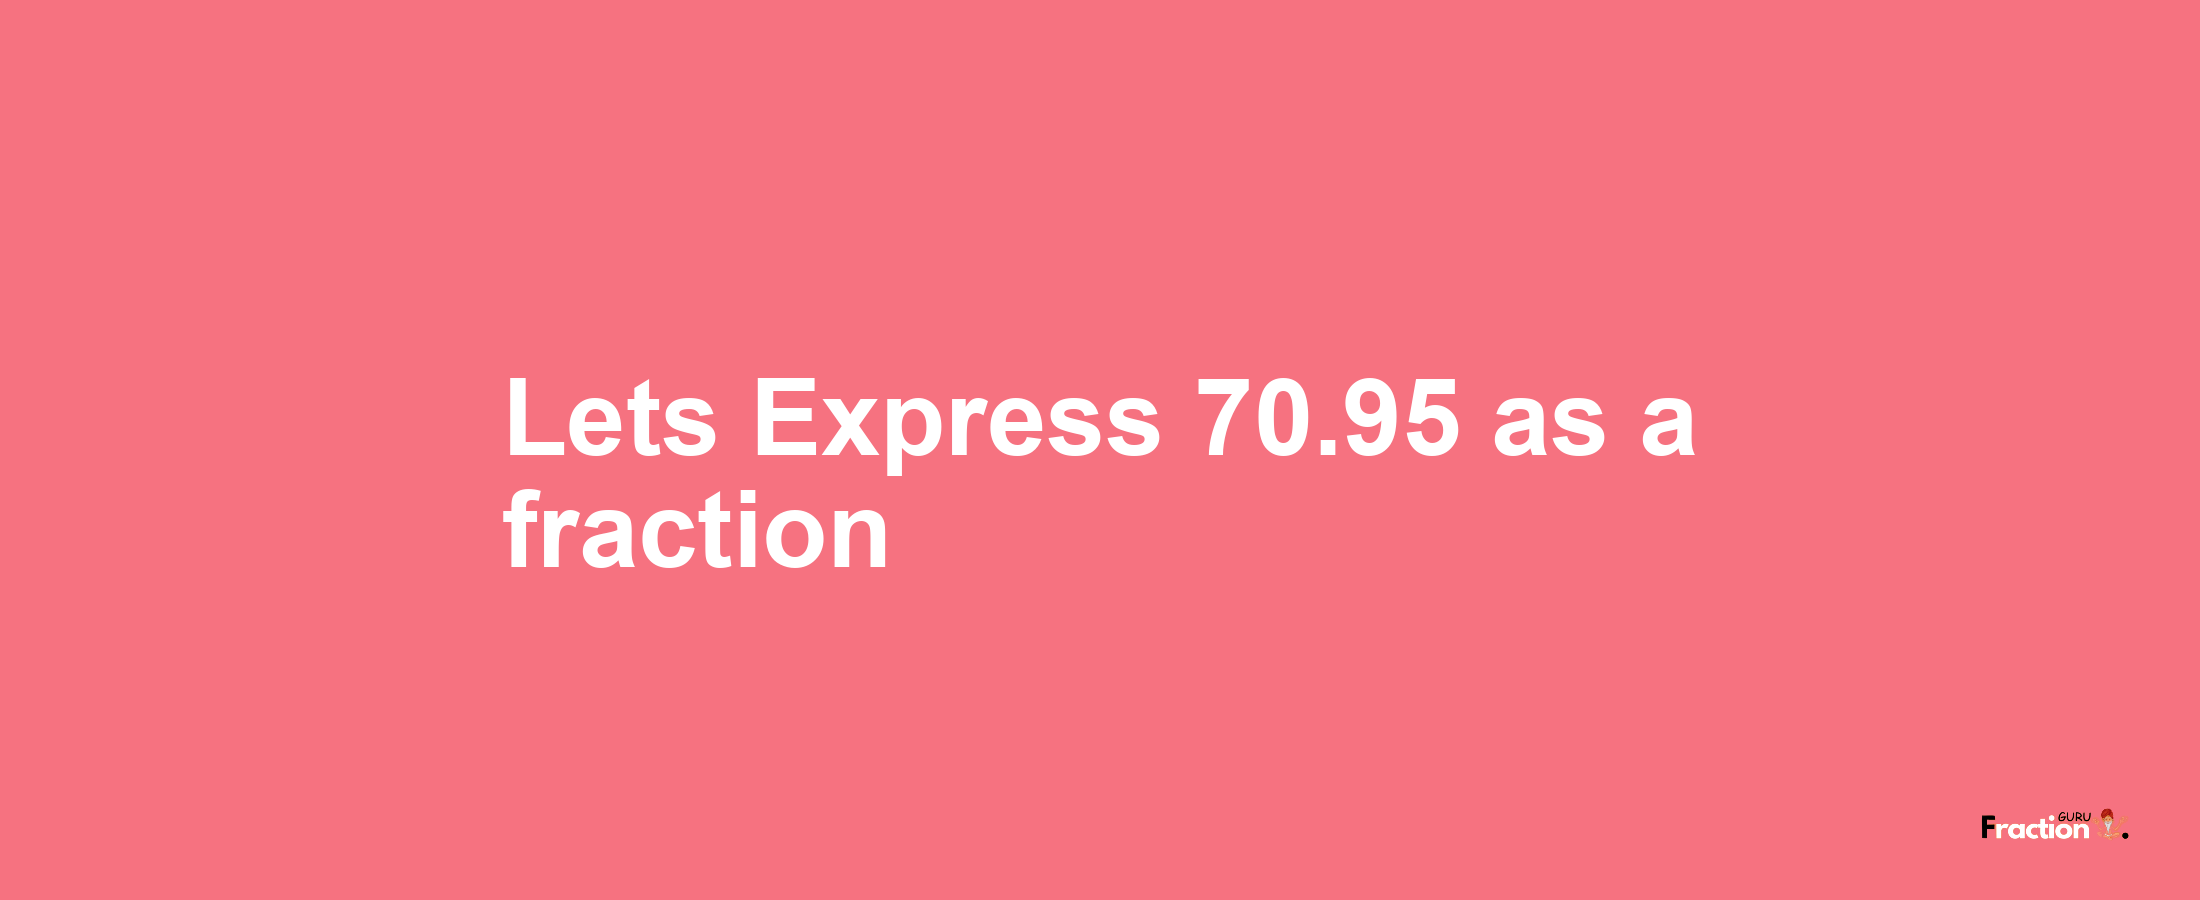 Lets Express 70.95 as afraction